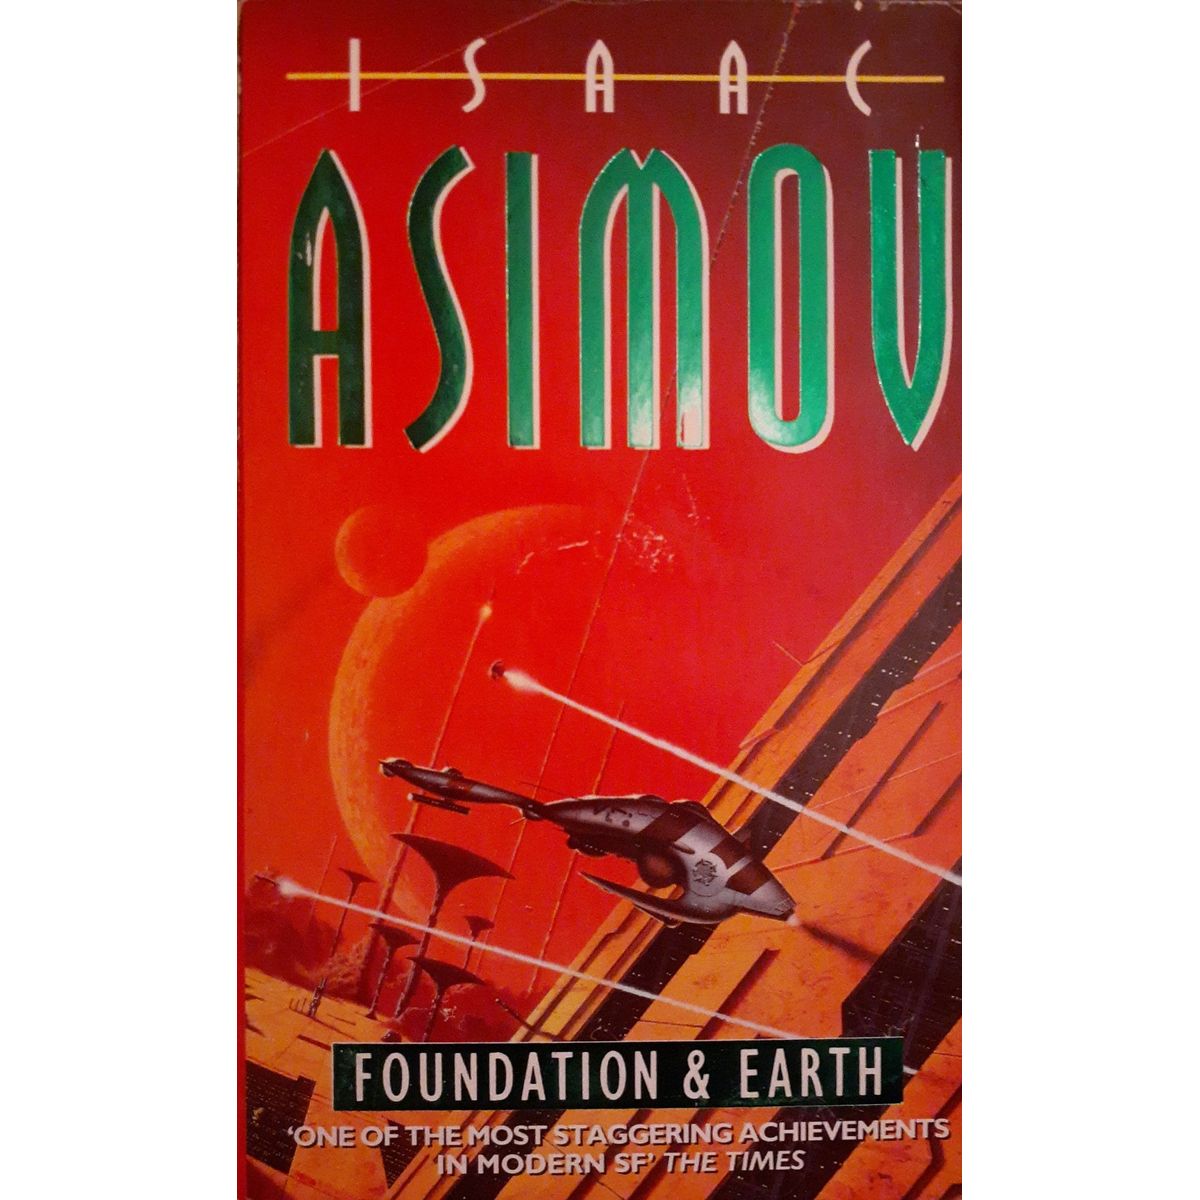 ISBN: 9780586071106 / 0586071105 - Foundation and Earth by Isaac Asimov [1996]